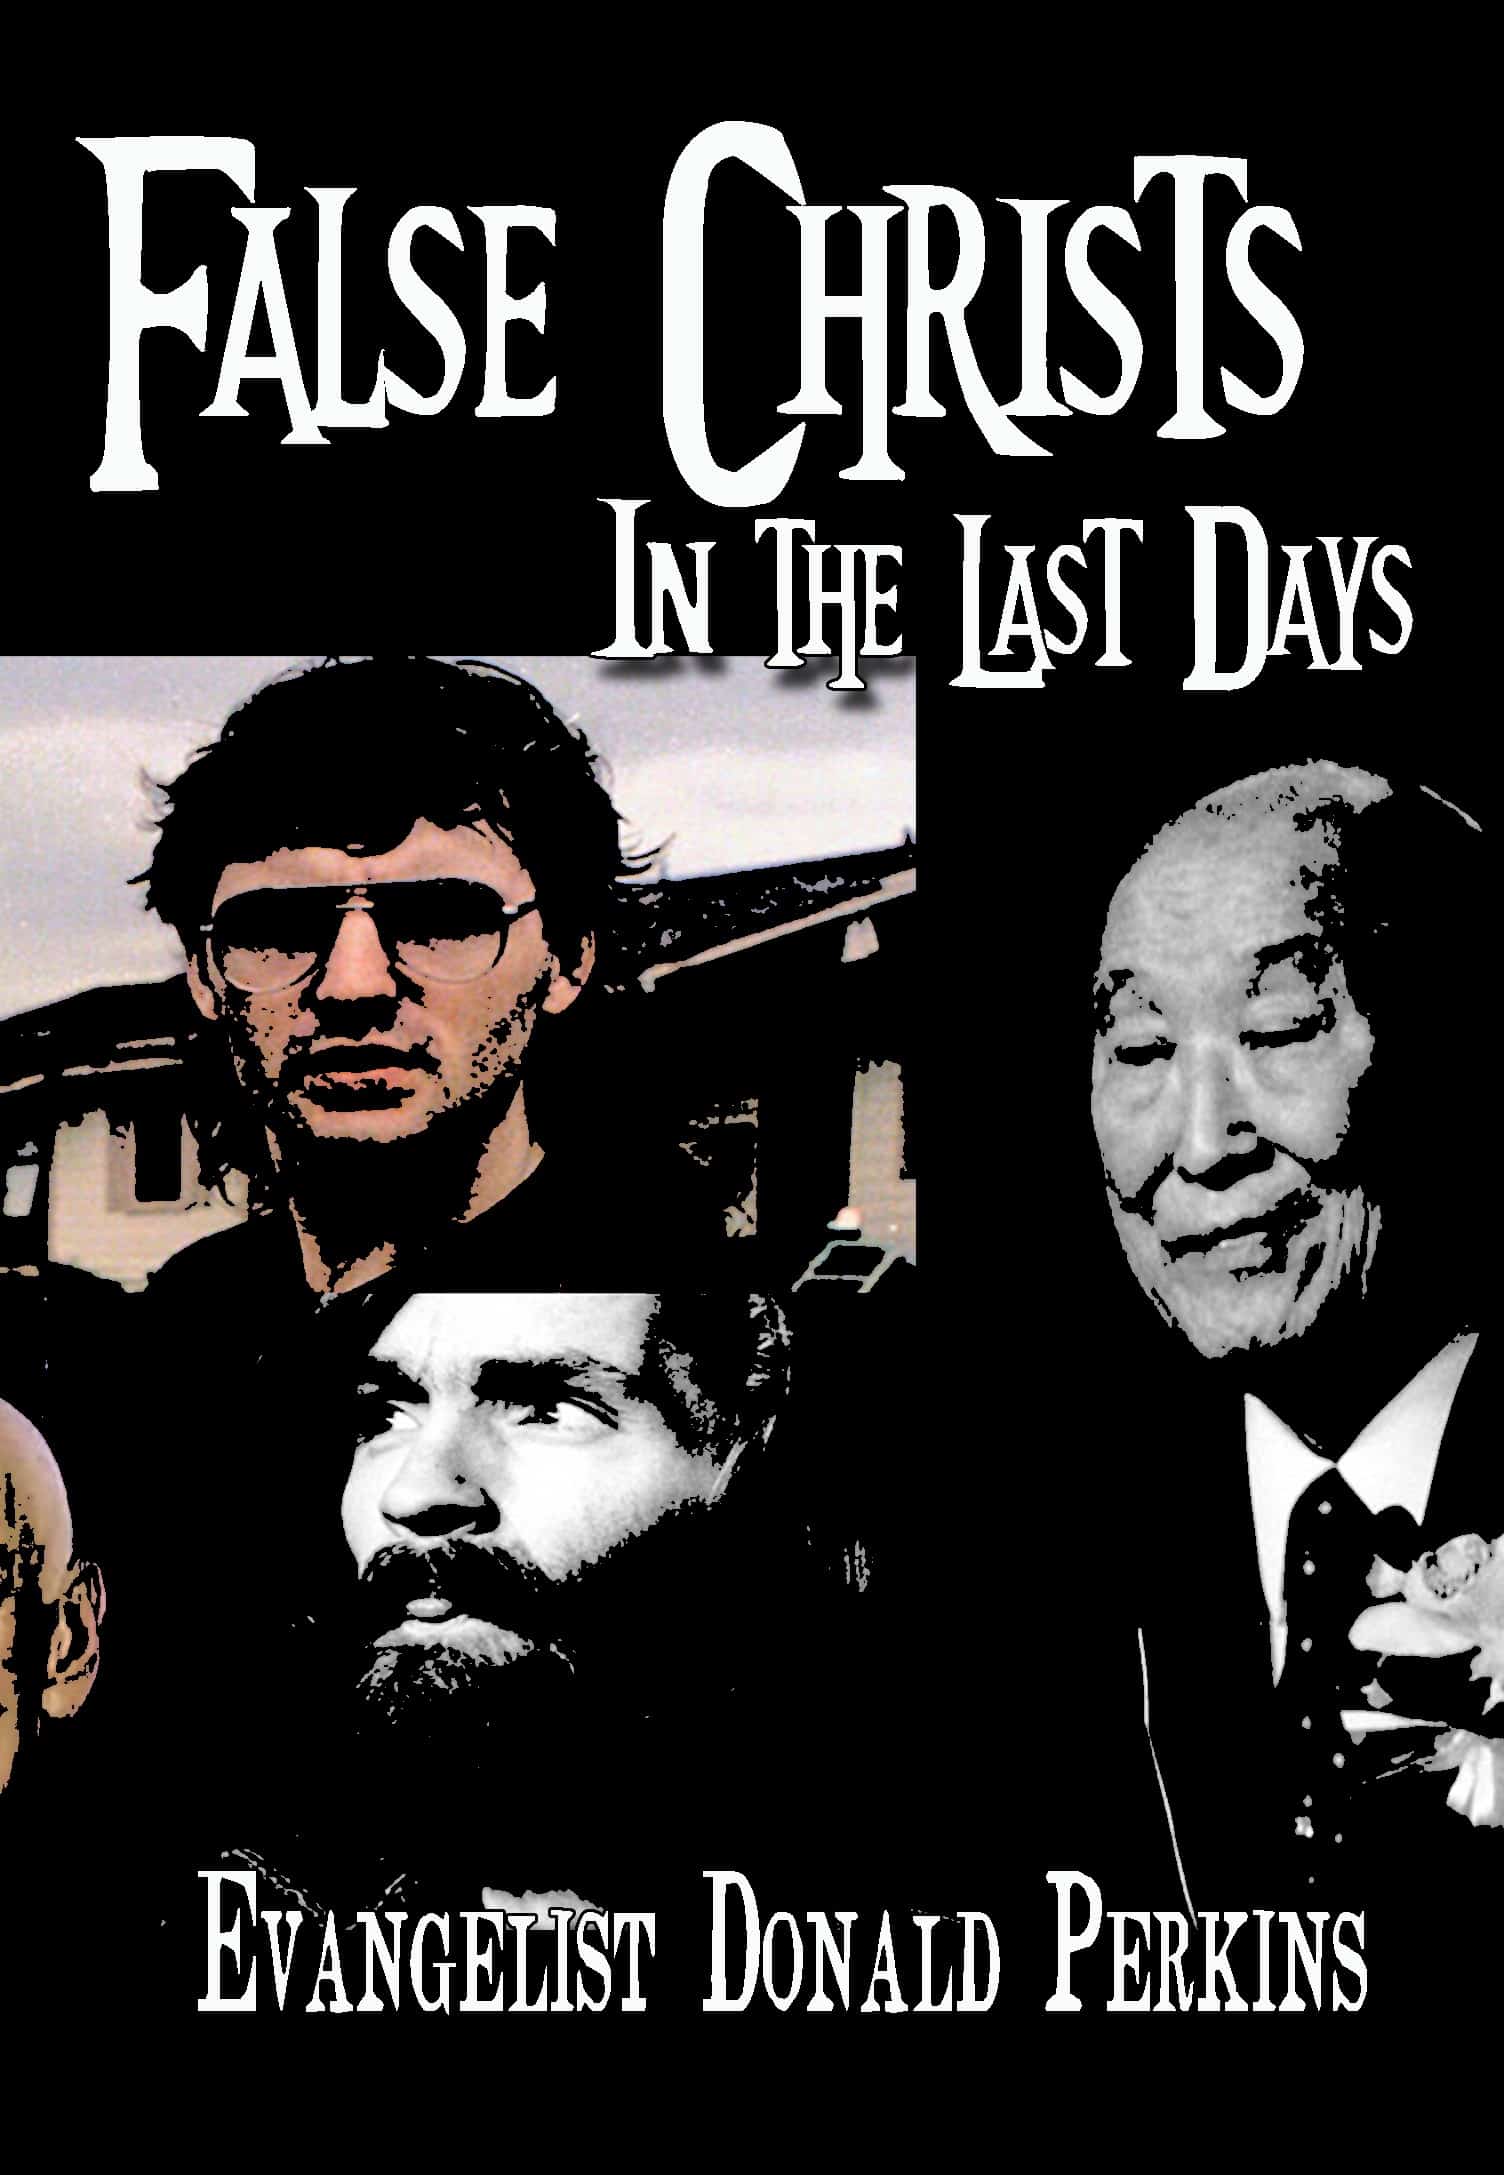 False　in　Perkins　Christs　Donald　the　(DVD)　Days　Last　SWRC